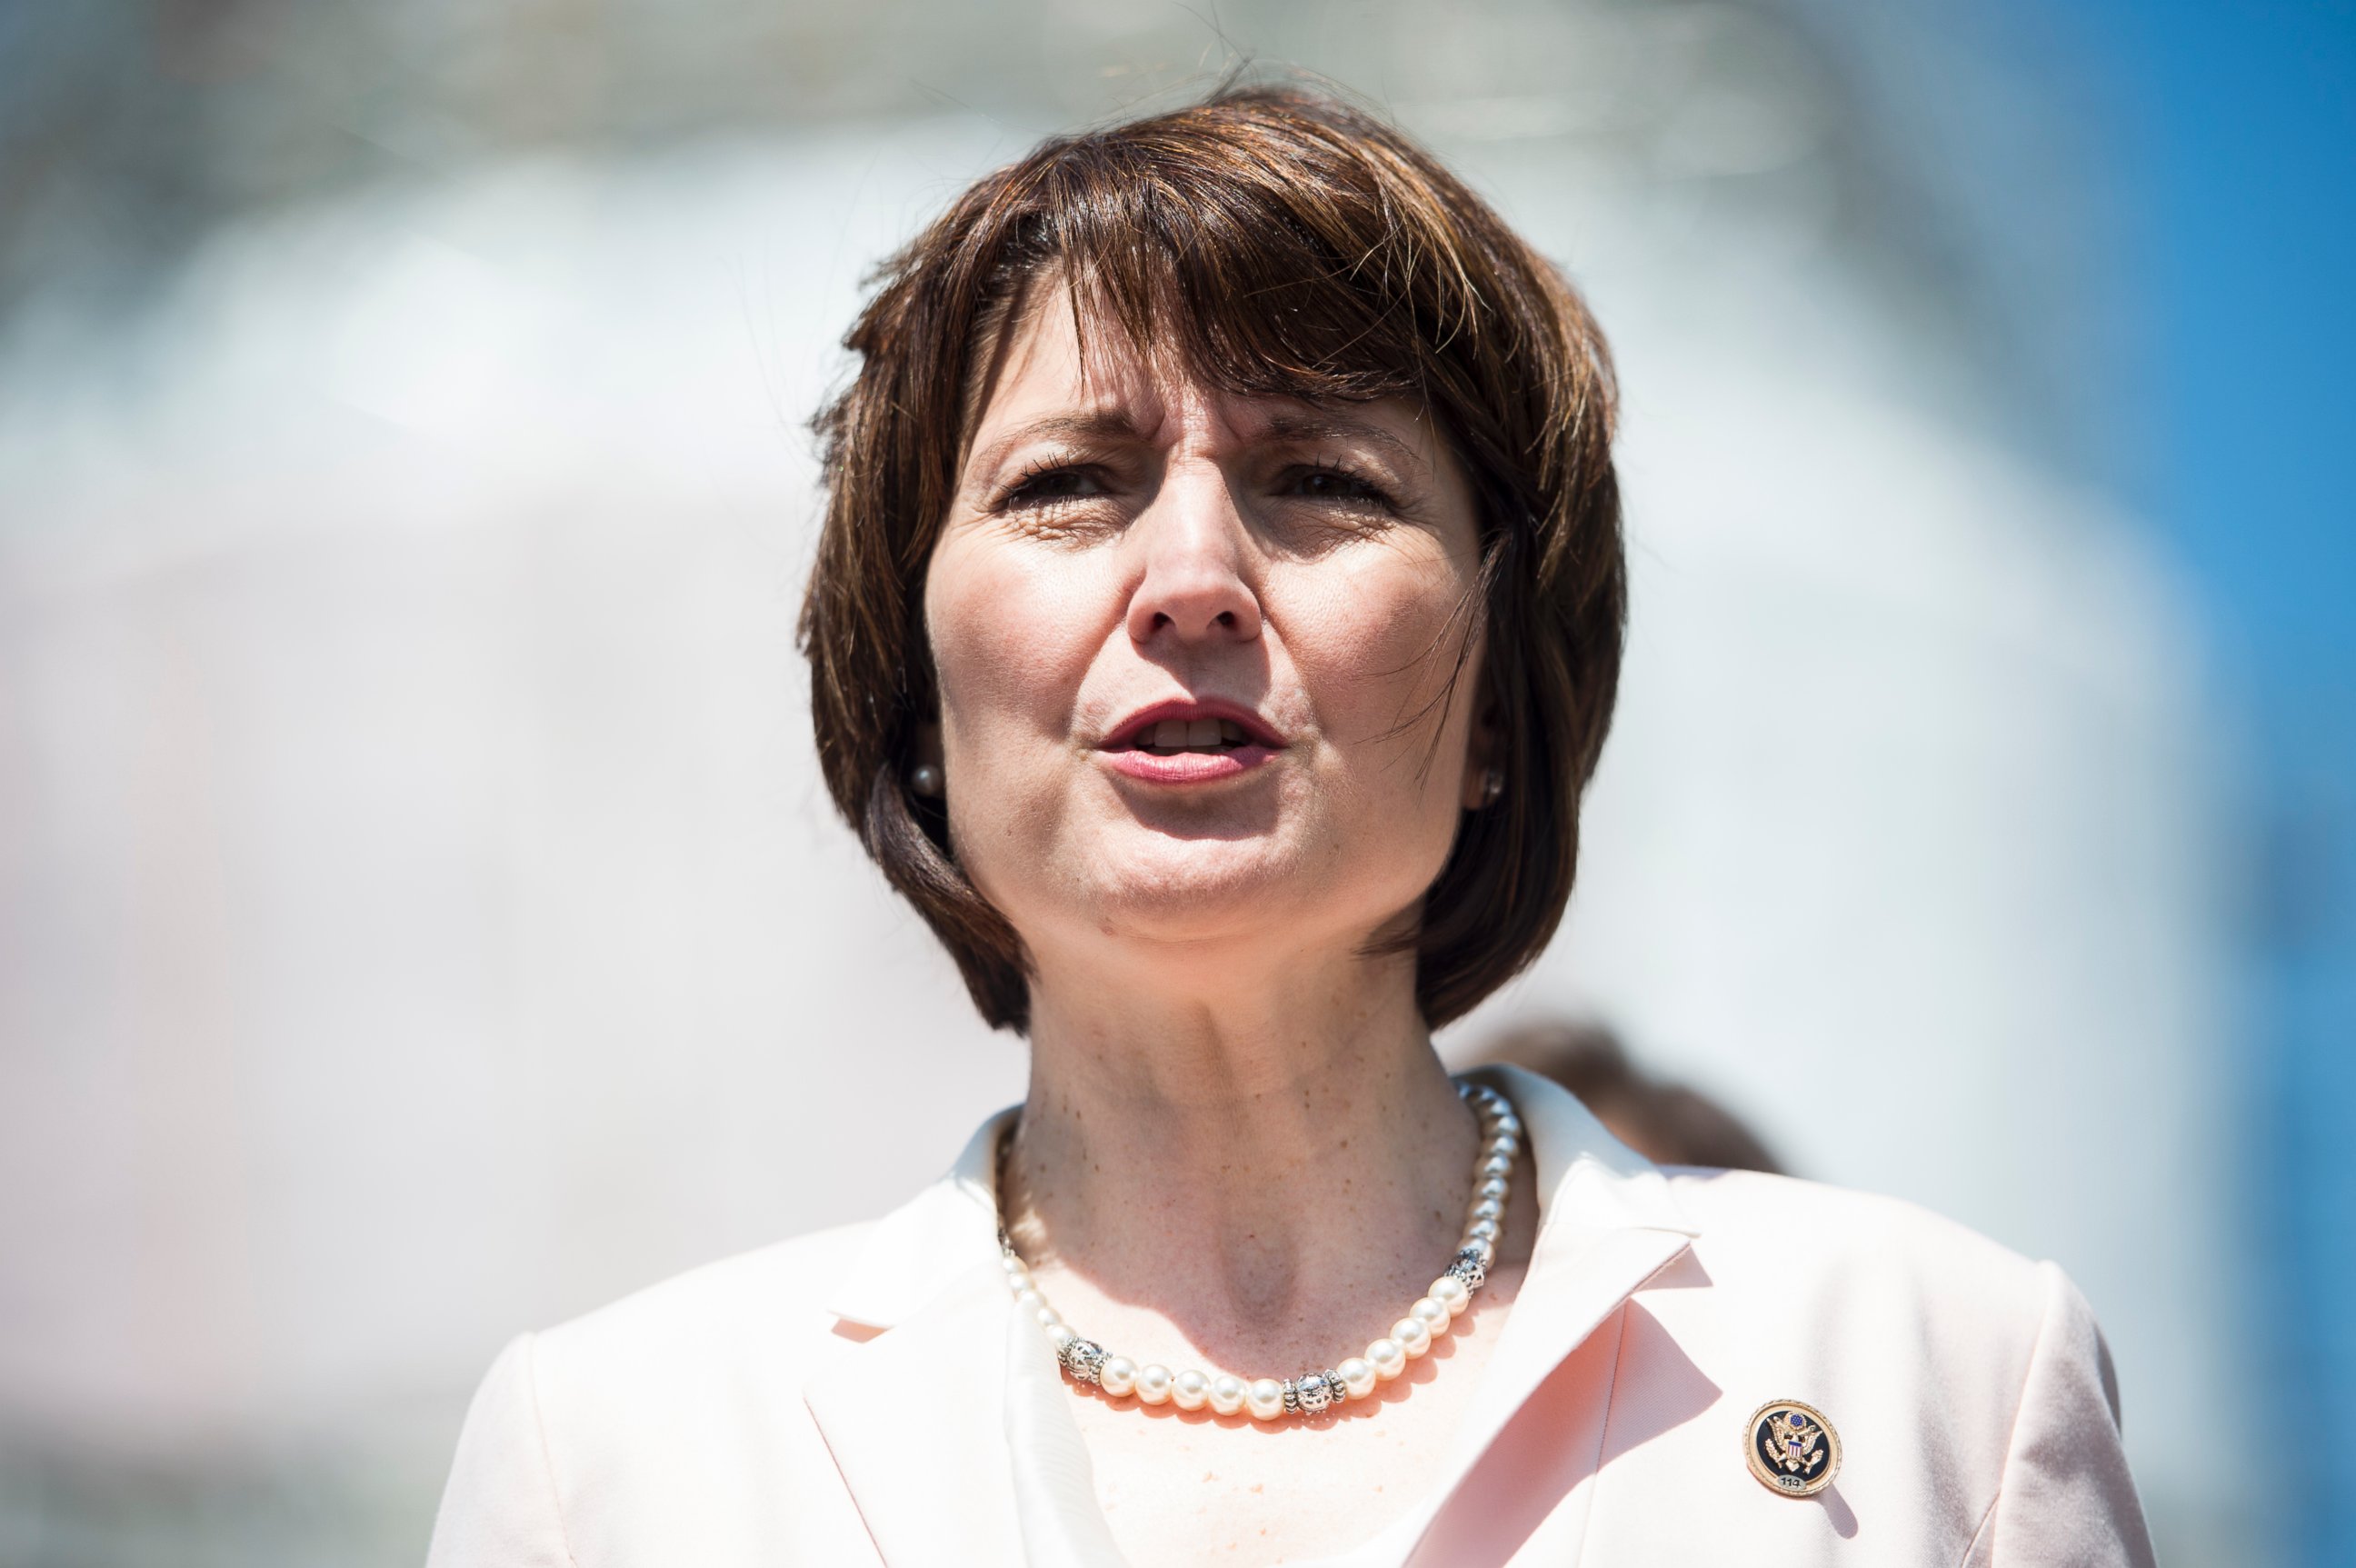 PHOTO: Rep. Cathy McMorris Rodgers participates in a news conference on Food and Drug Administration menu labeling regulations on April 28, 2015.